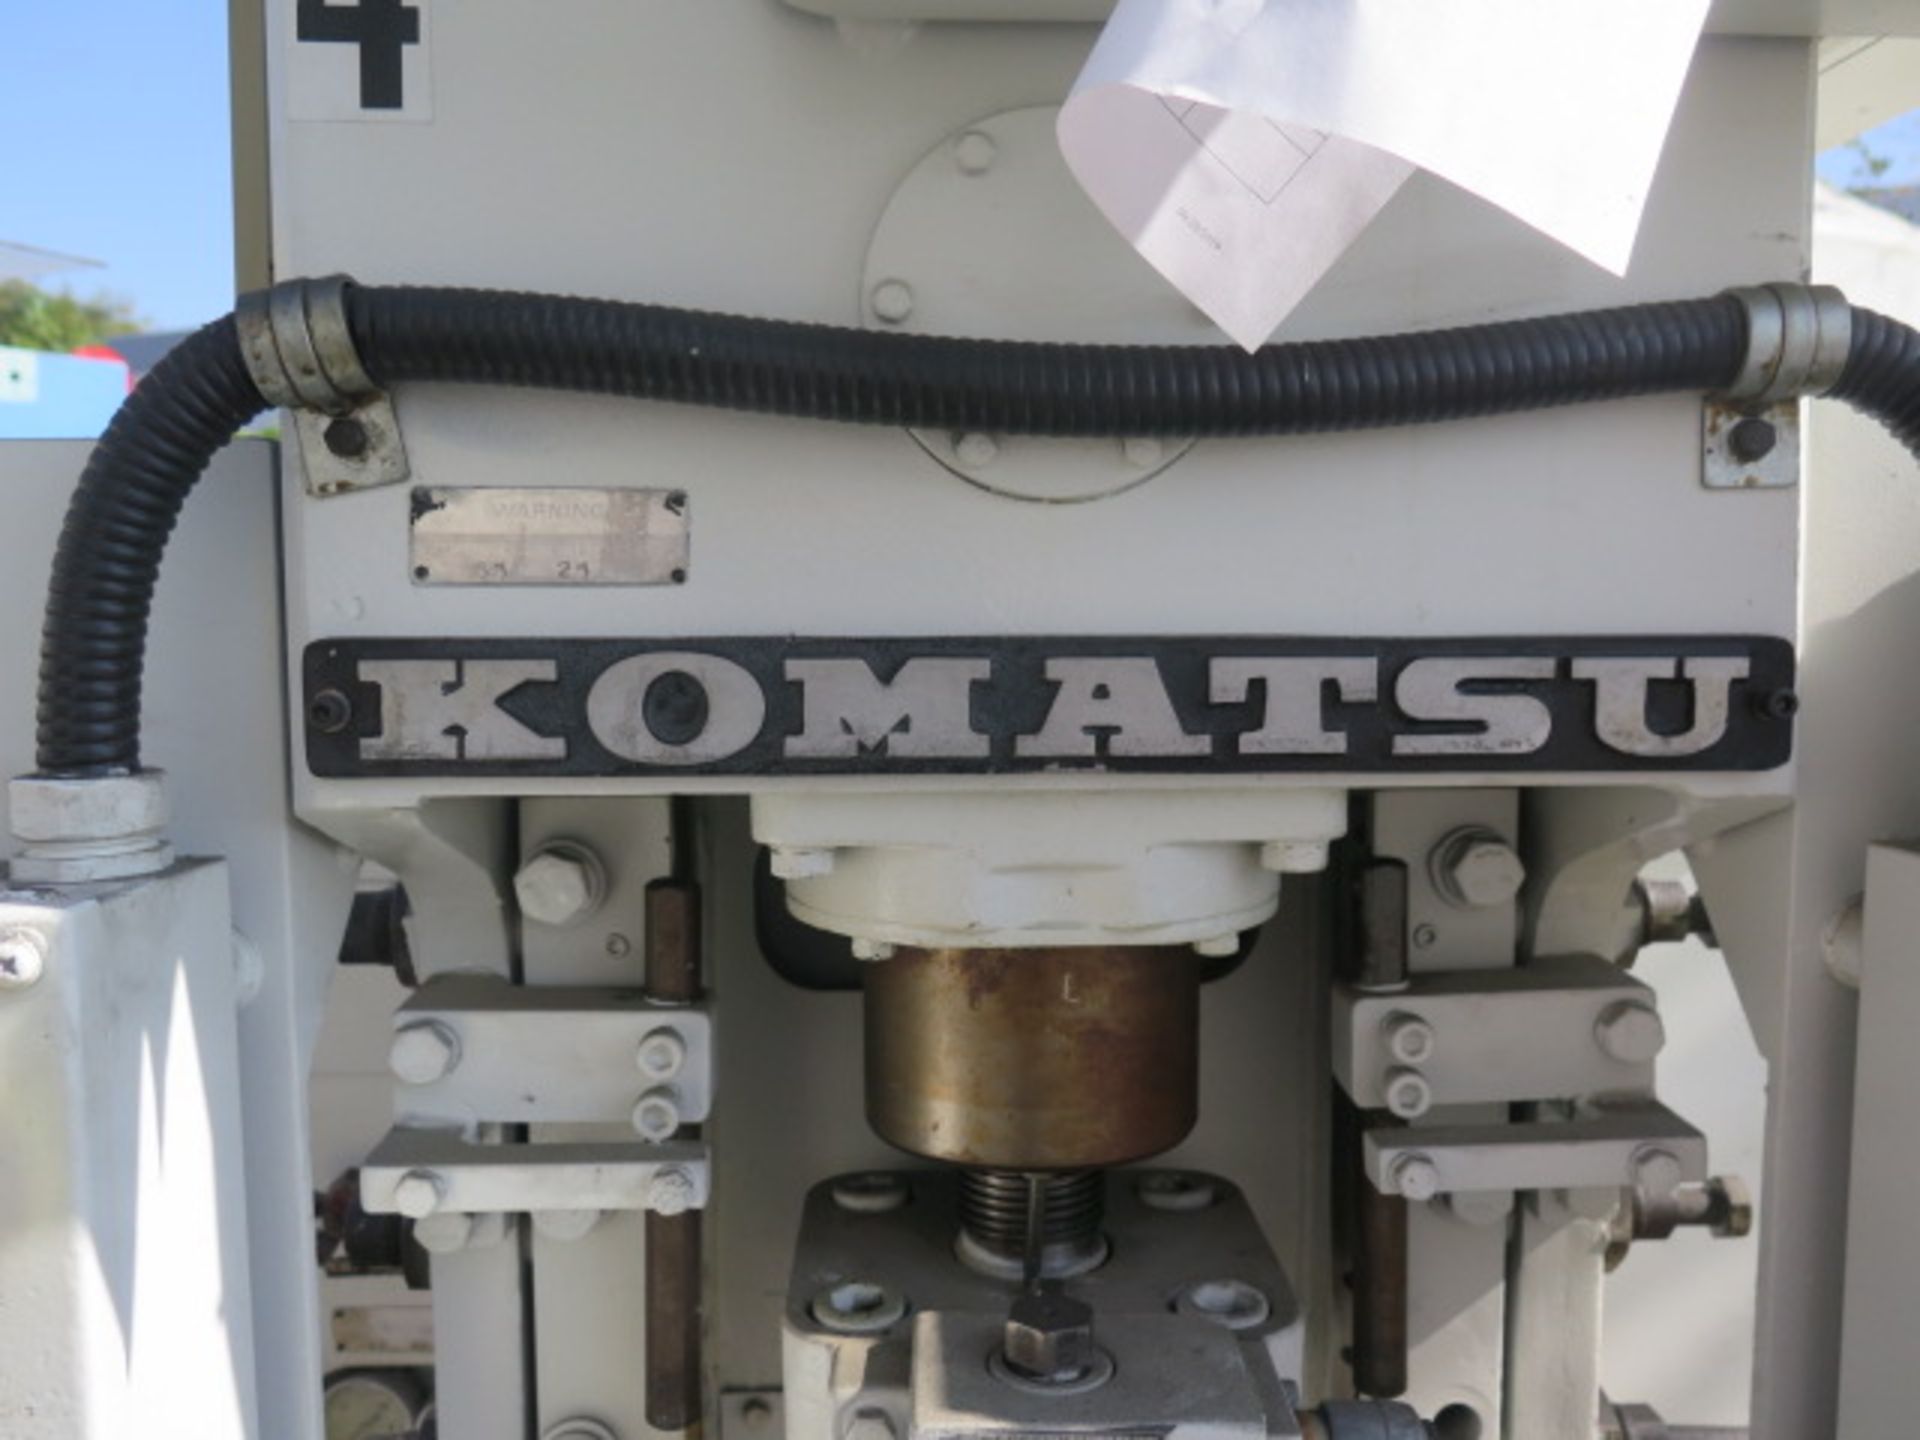 Komatsu OBS25-2 25 Ton Stamping Press (FOR PARTS ONLY - BROKEM RAM) s/n 10676, SOLD AS-IS - NO WARRA - Image 10 of 11